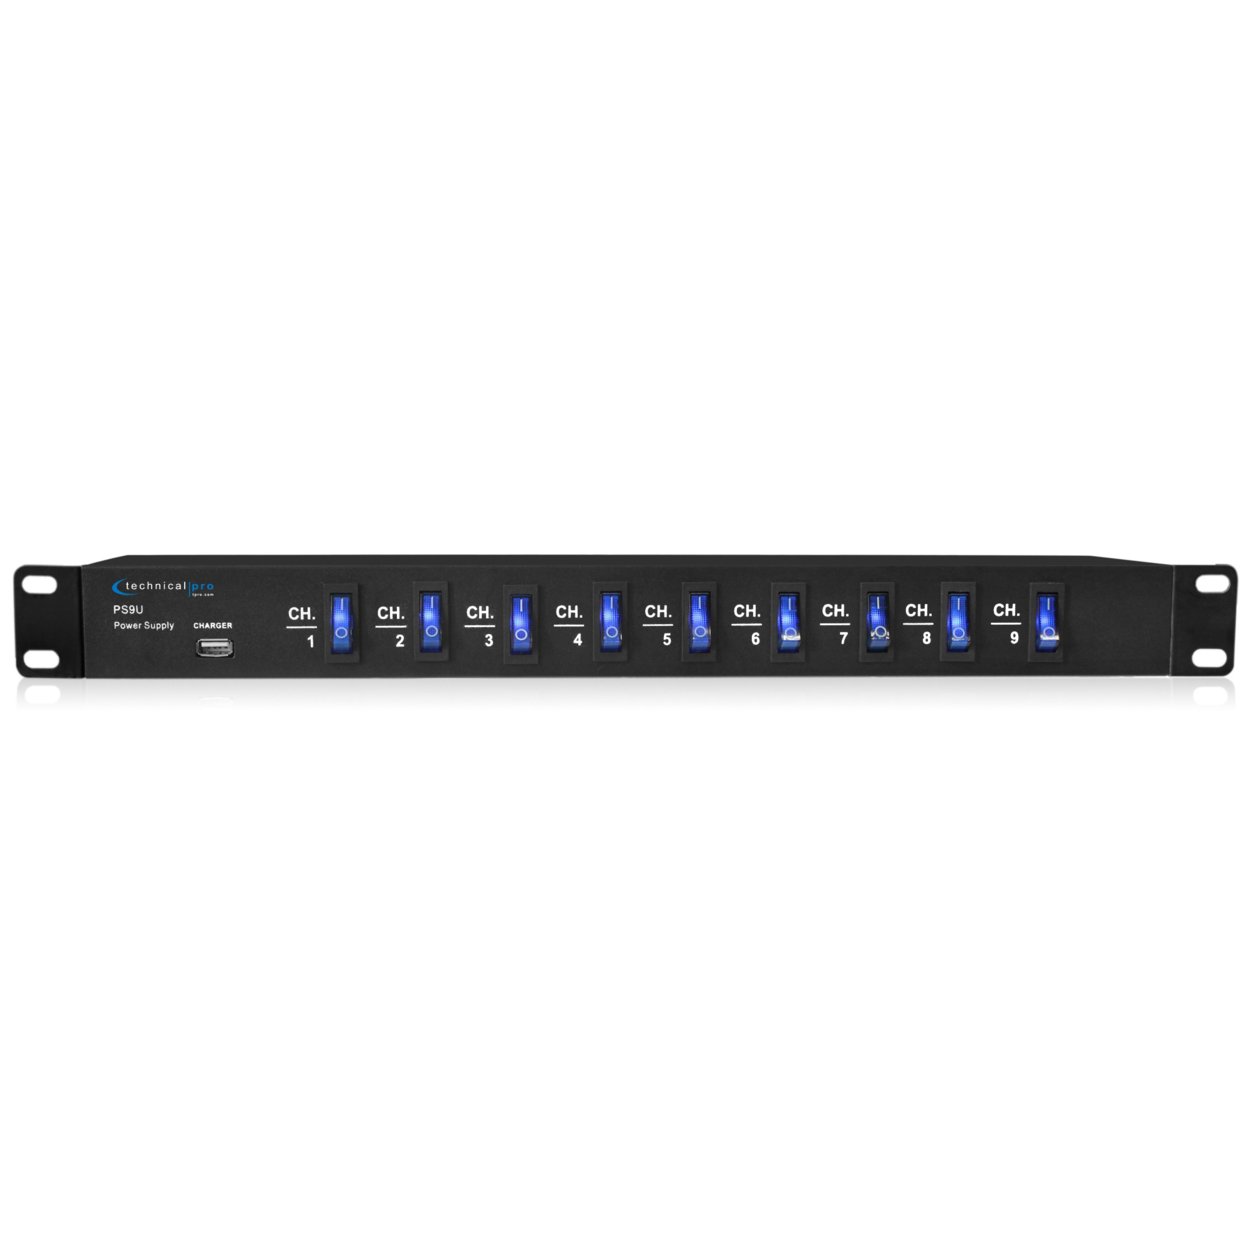 Technical Pro 1800W 9 Outlet High Load Electric Rack Mount Power Supply W/ 9 Power Switches, Extension Cords, And 5V USB Charging Port